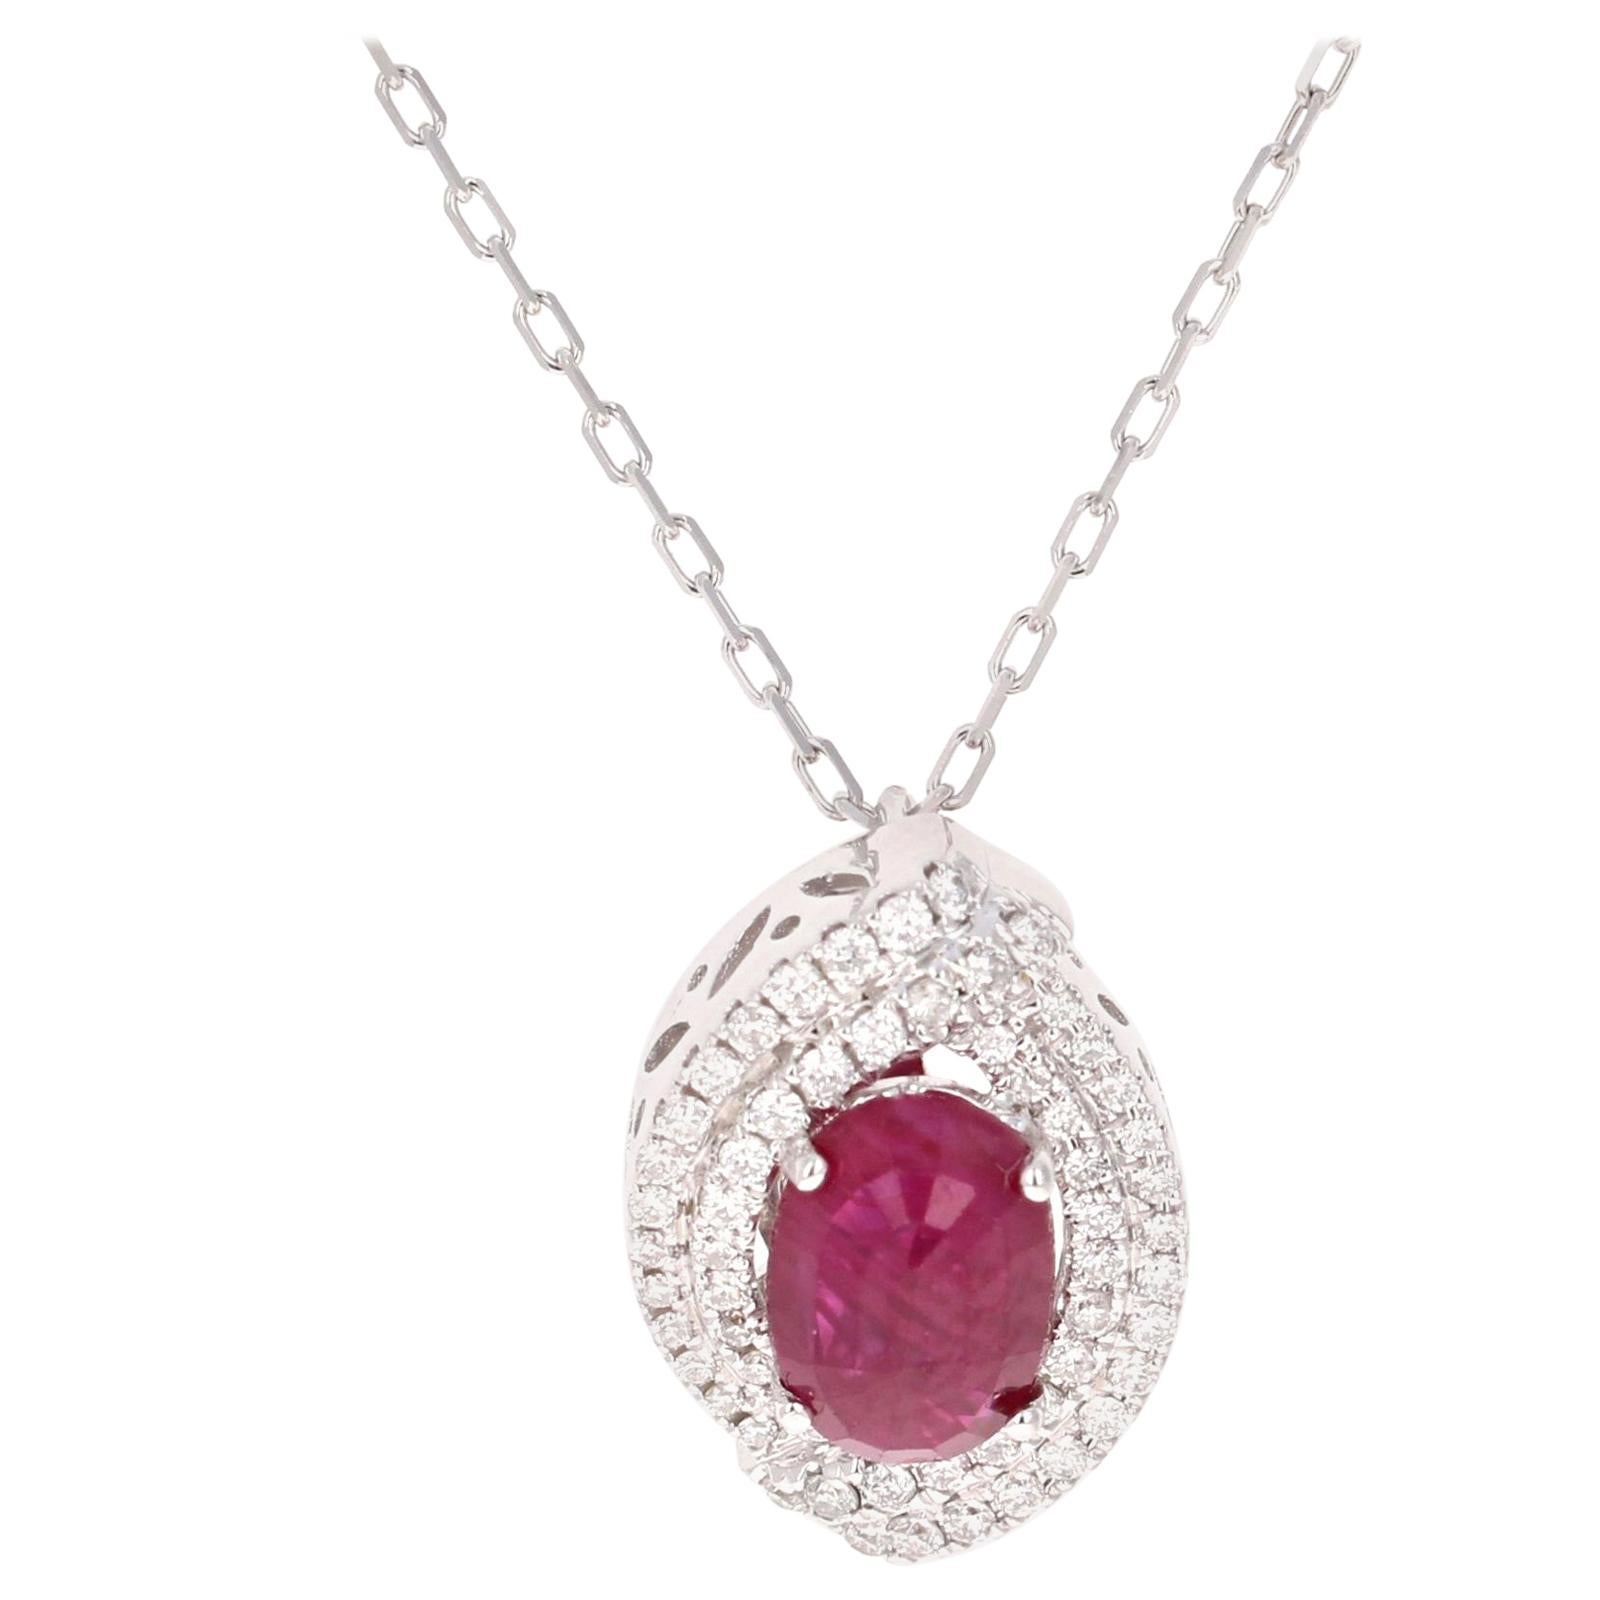 2.64 Carat Ruby Diamond White Gold Chain Necklace